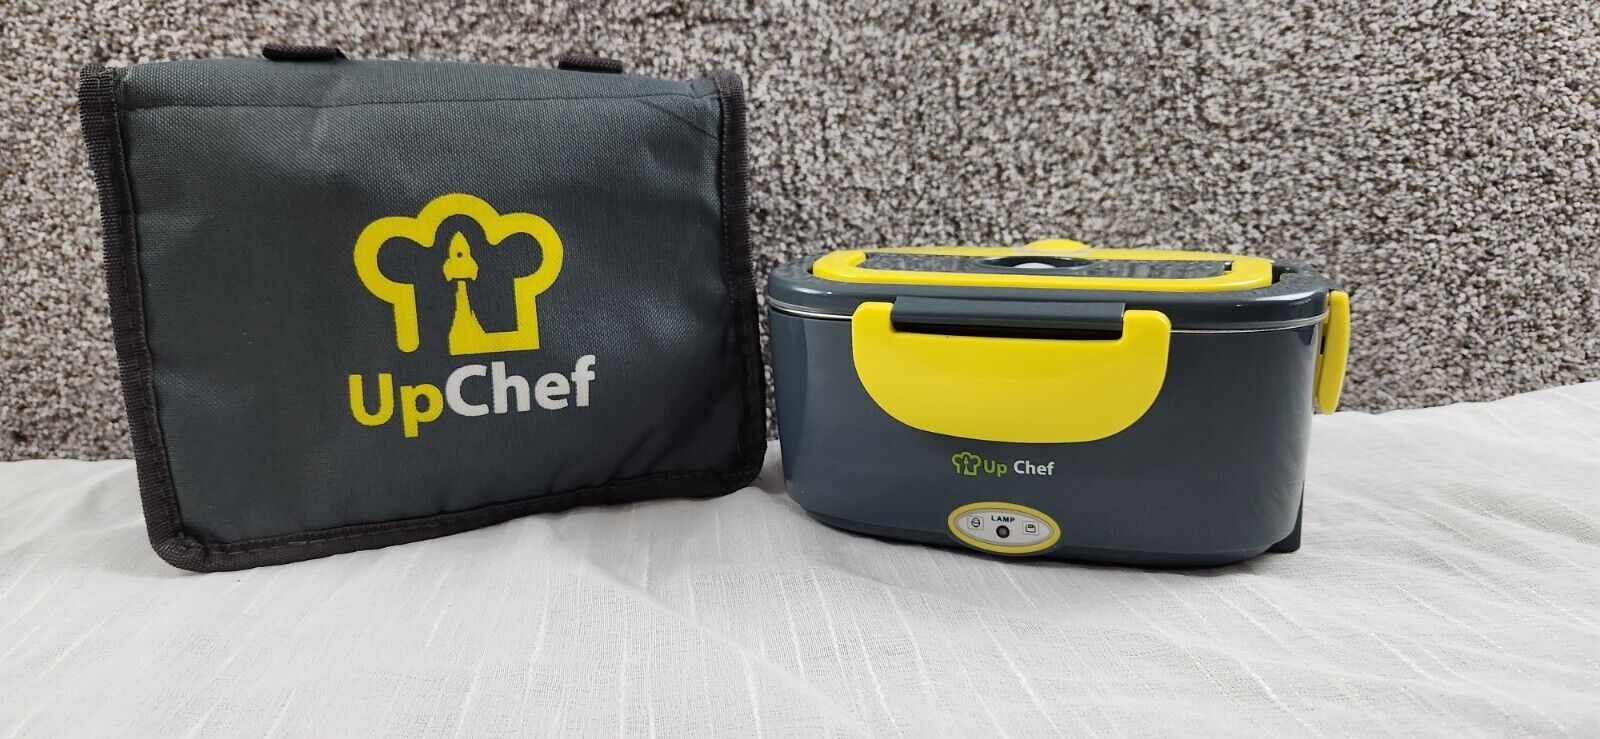 Up Chef Electric Car Carry Lunchbox Yellow/Black Corded and Carrying Case